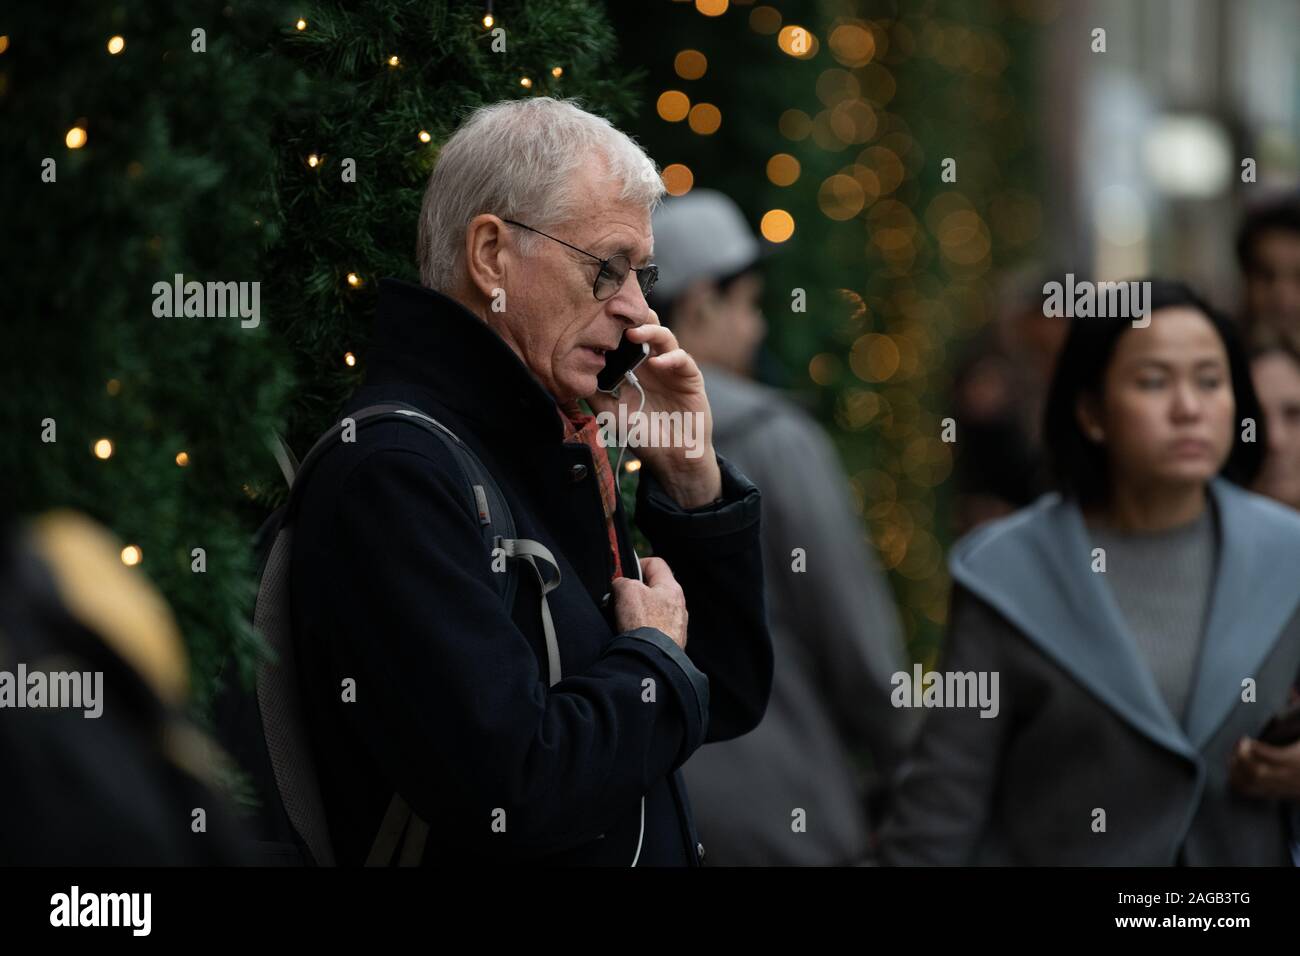 Grey haired man talking on a mobile phone, Christmas trees in the background, outside Selfridges Stock Photo